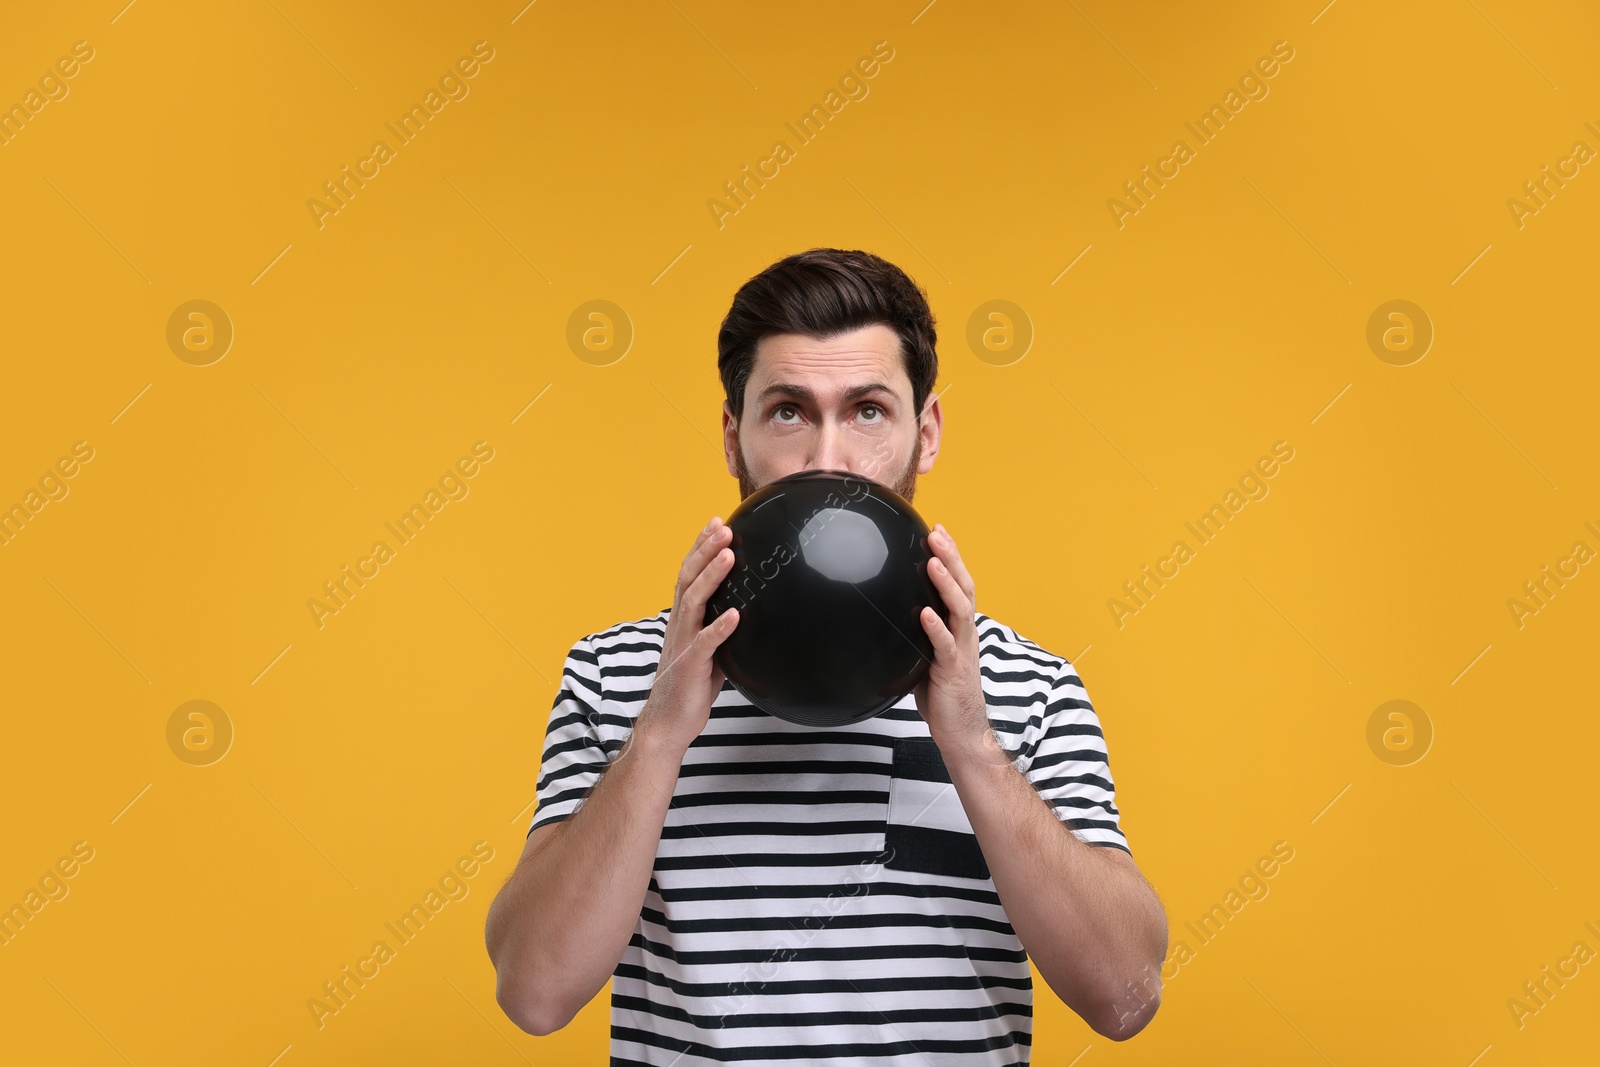 Photo of Man inflating black balloon on yellow background